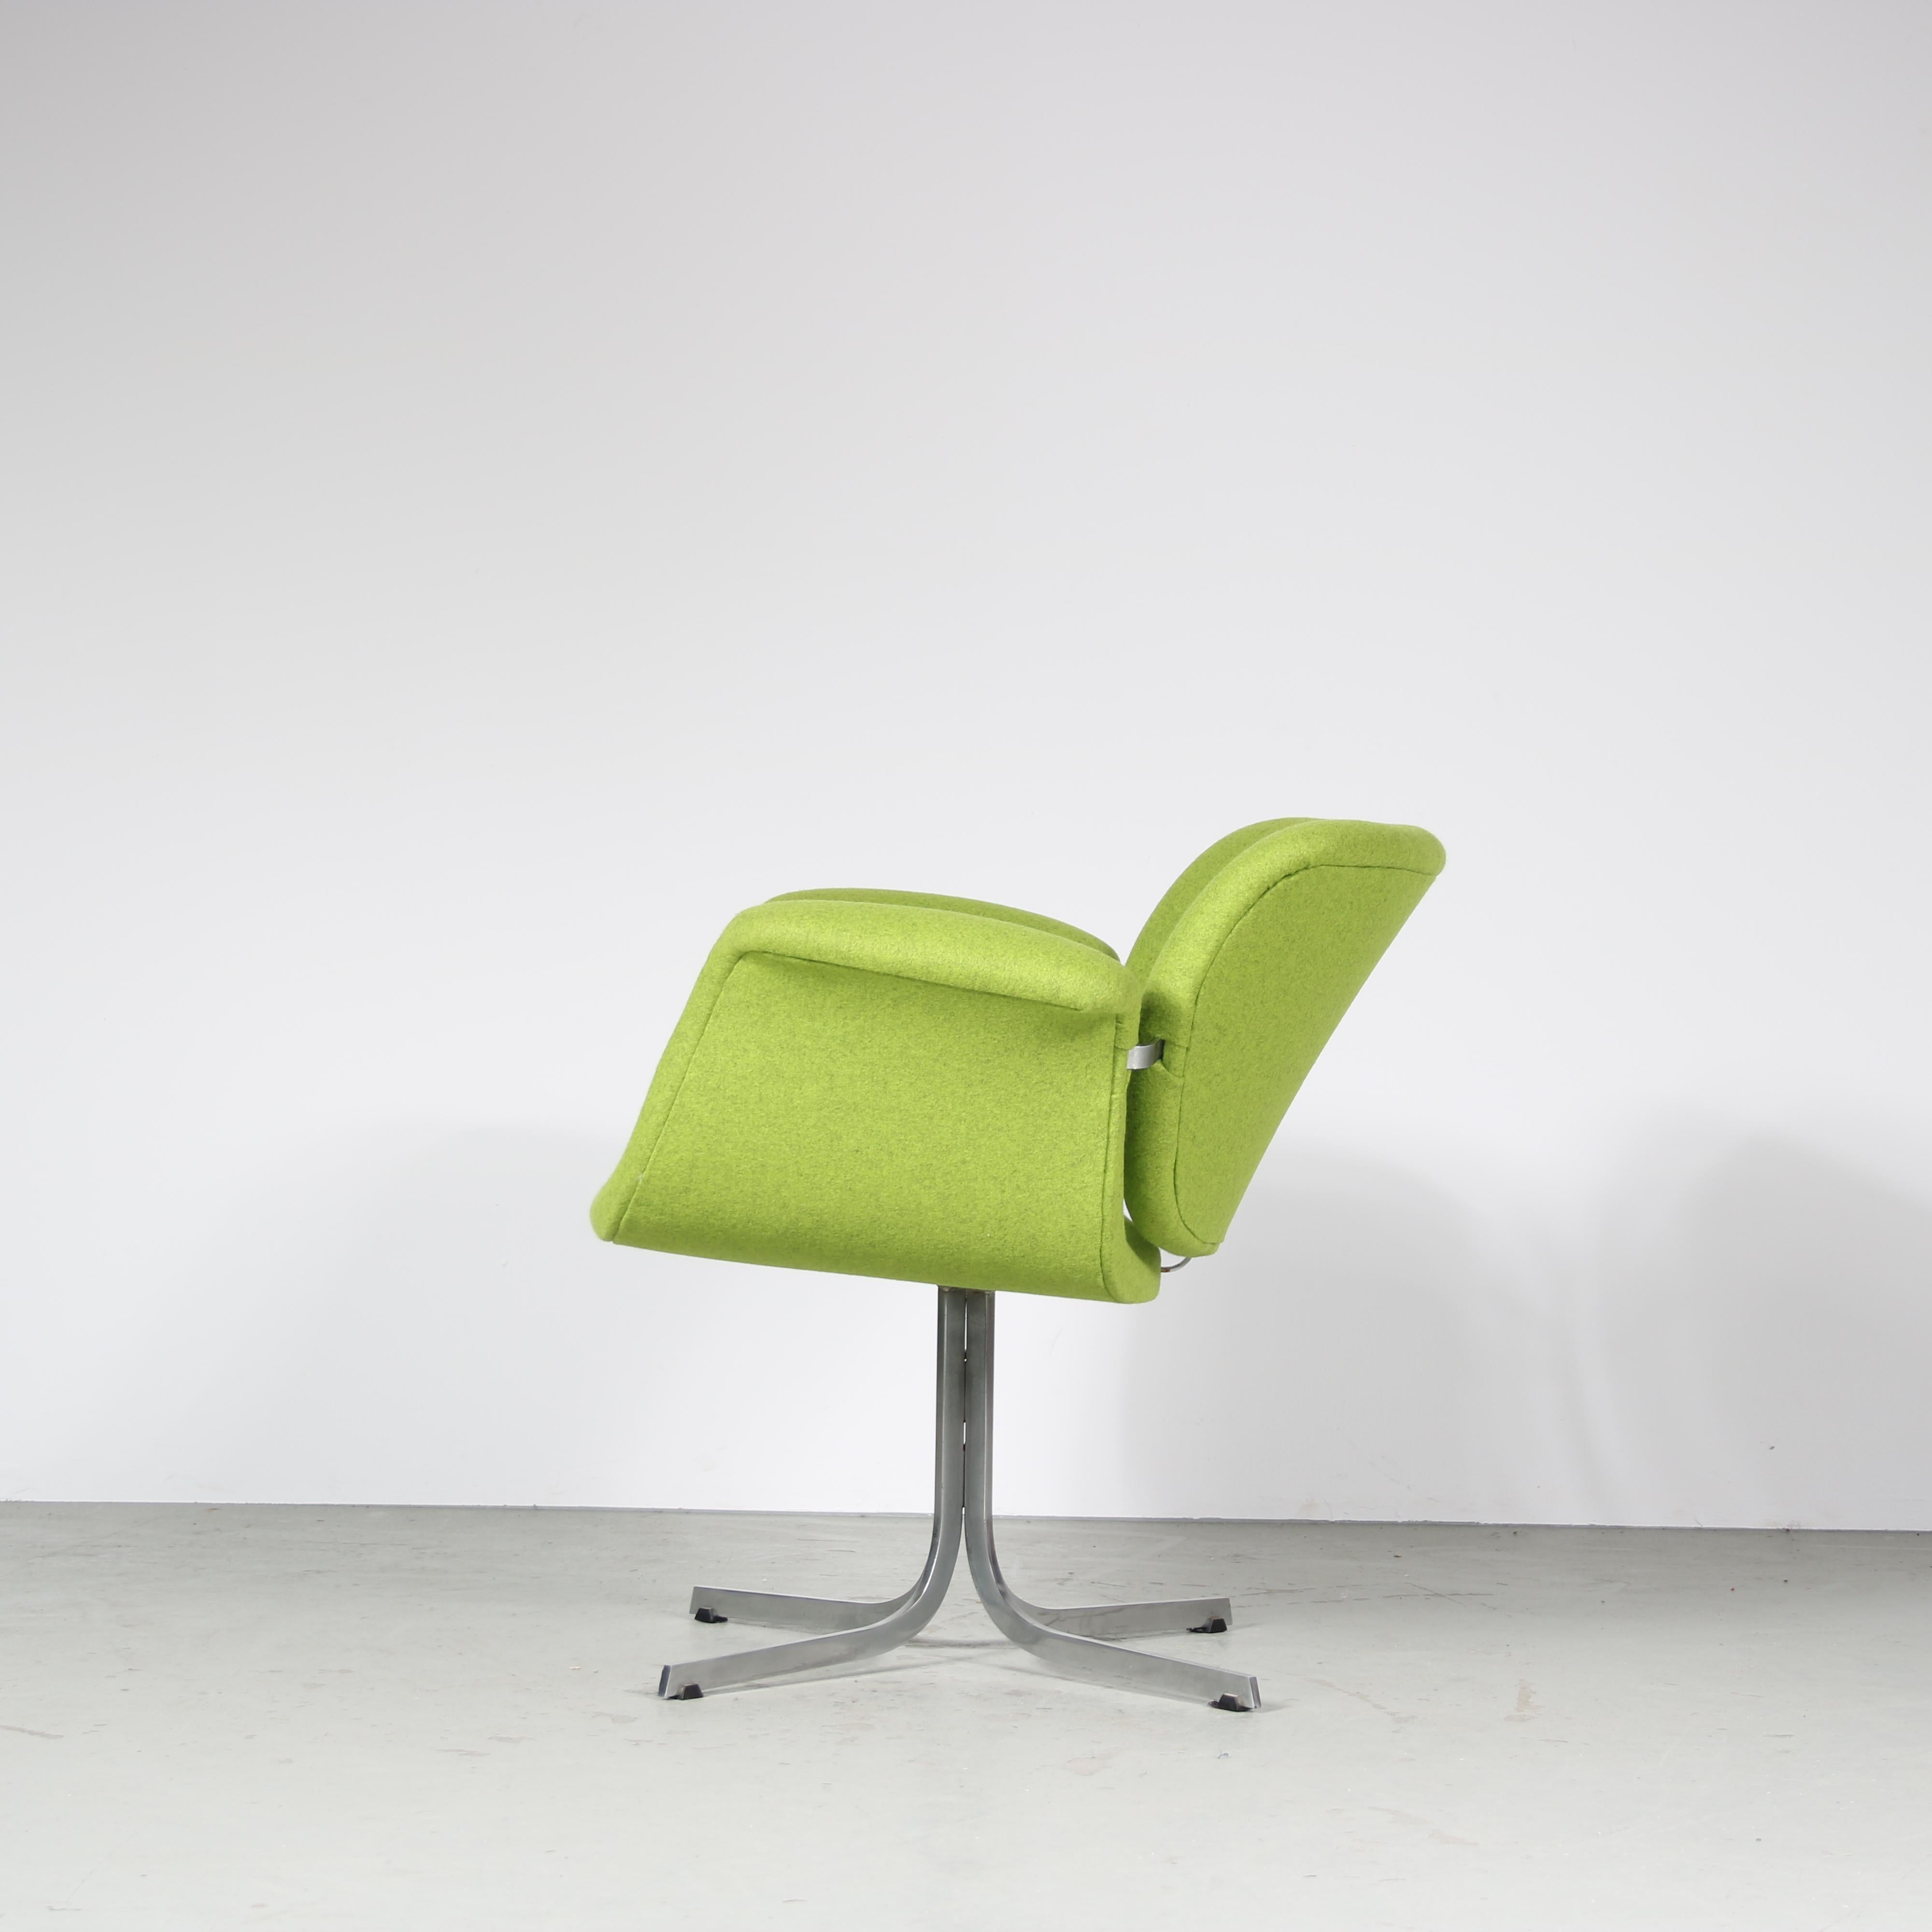 Pierre Paulin “Big Tulip” Chair for Artifort, Netherlands 1960 In Good Condition For Sale In Amsterdam, NL